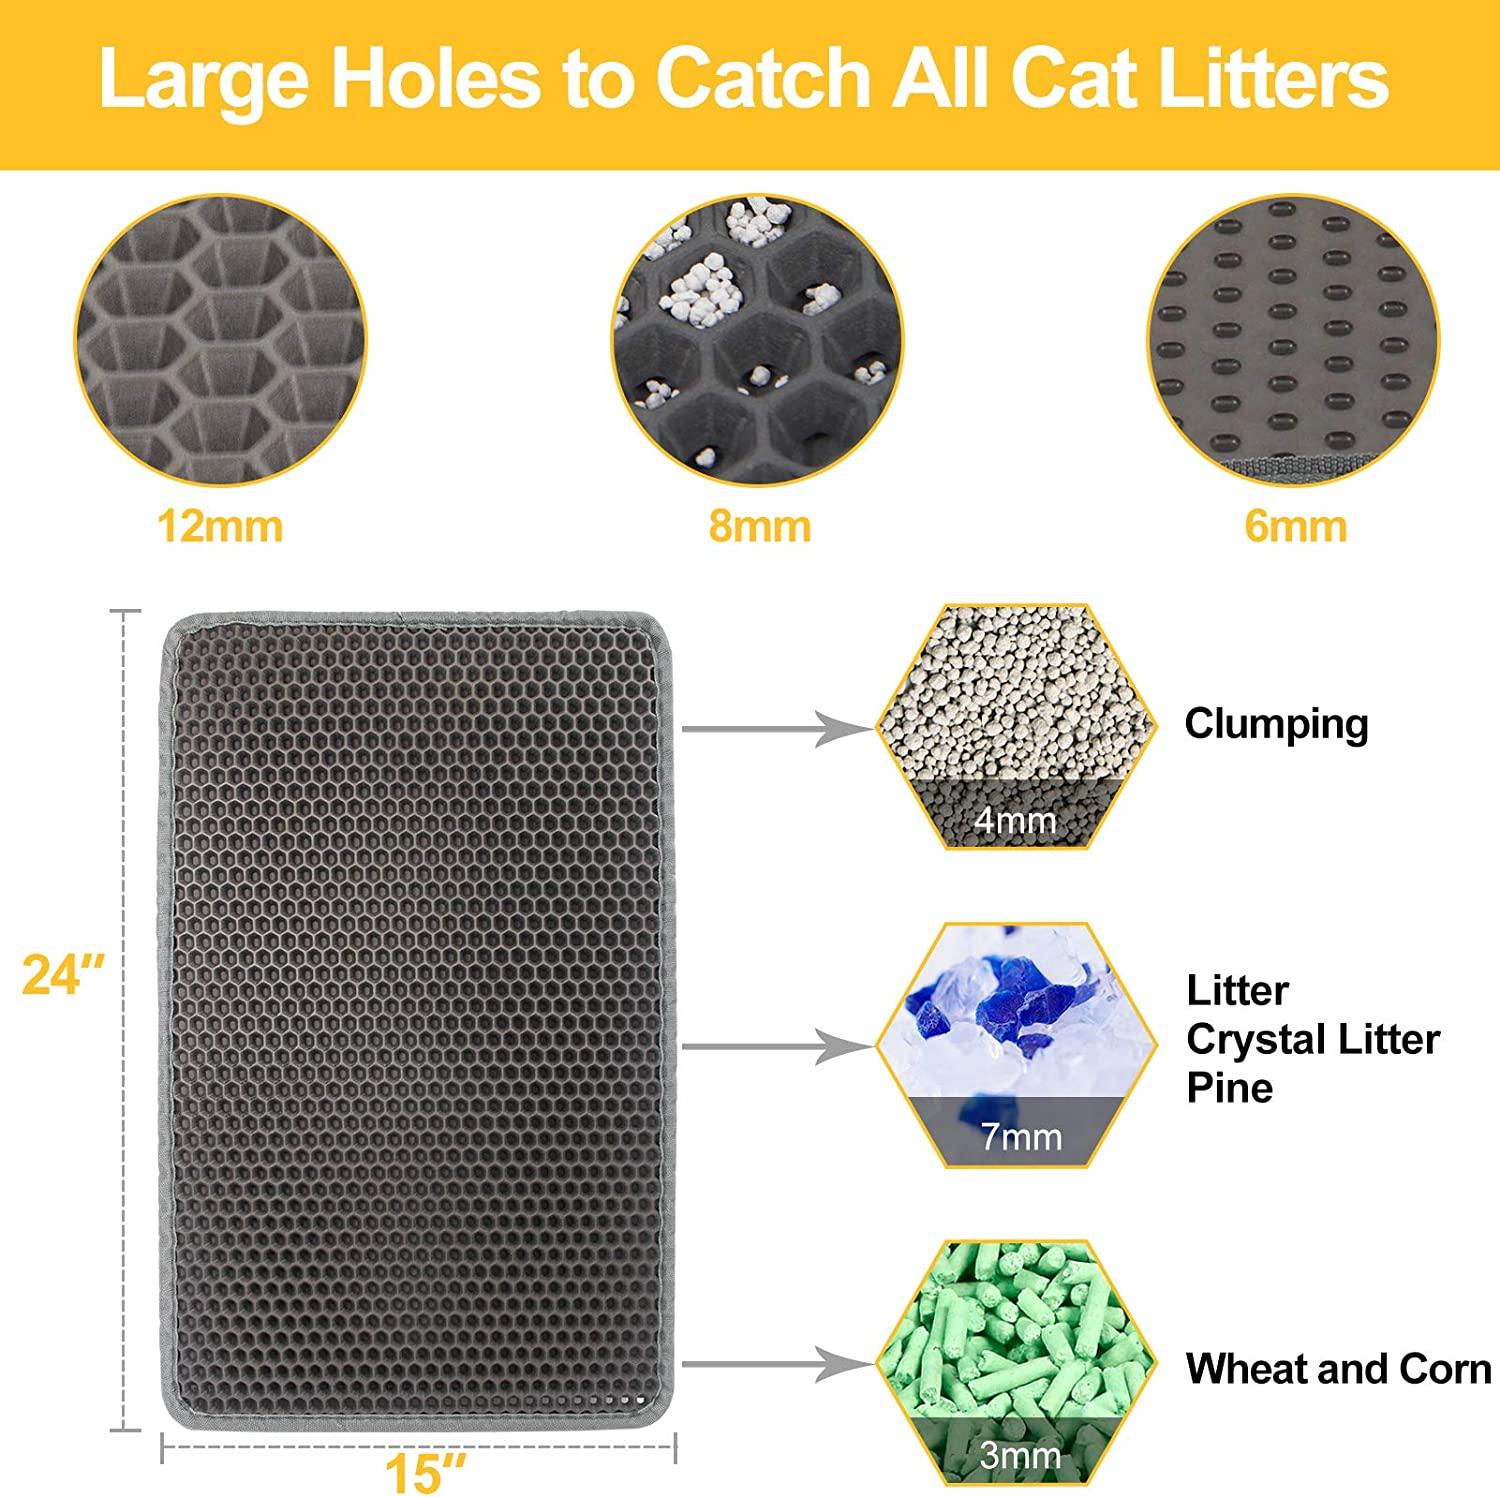 LeToo Cat Litter Mat Trapping for Litter Box, No-Toxic & Super Size, Urine  & Waterproof, Honeycomb Double Layer Anti Tracking Kitty Mats, No  Phthalate, Washable Easy Clean 24 x 15 Grey